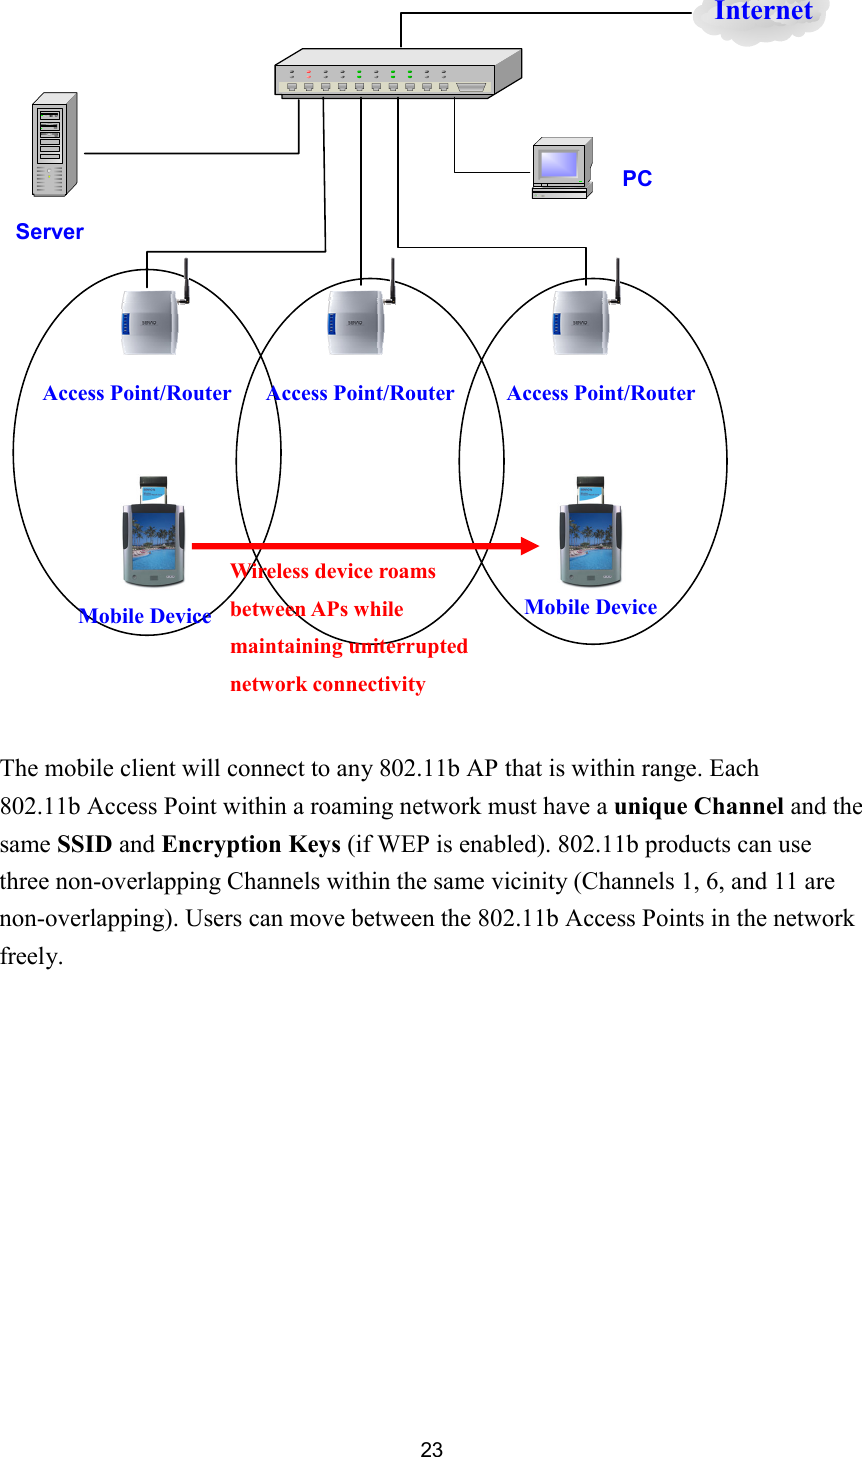  23  The mobile client will connect to any 802.11b AP that is within range. Each 802.11b Access Point within a roaming network must have a unique Channel and the same SSID and Encryption Keys (if WEP is enabled). 802.11b products can use three non-overlapping Channels within the same vicinity (Channels 1, 6, and 11 are non-overlapping). Users can move between the 802.11b Access Points in the network freely.          Internet PC Server Access Point/Router  Access Point/Router  Access Point/Router Mobile Device  Mobile Device Wireless device roams between APs while maintaining uniterrupted network connectivity   